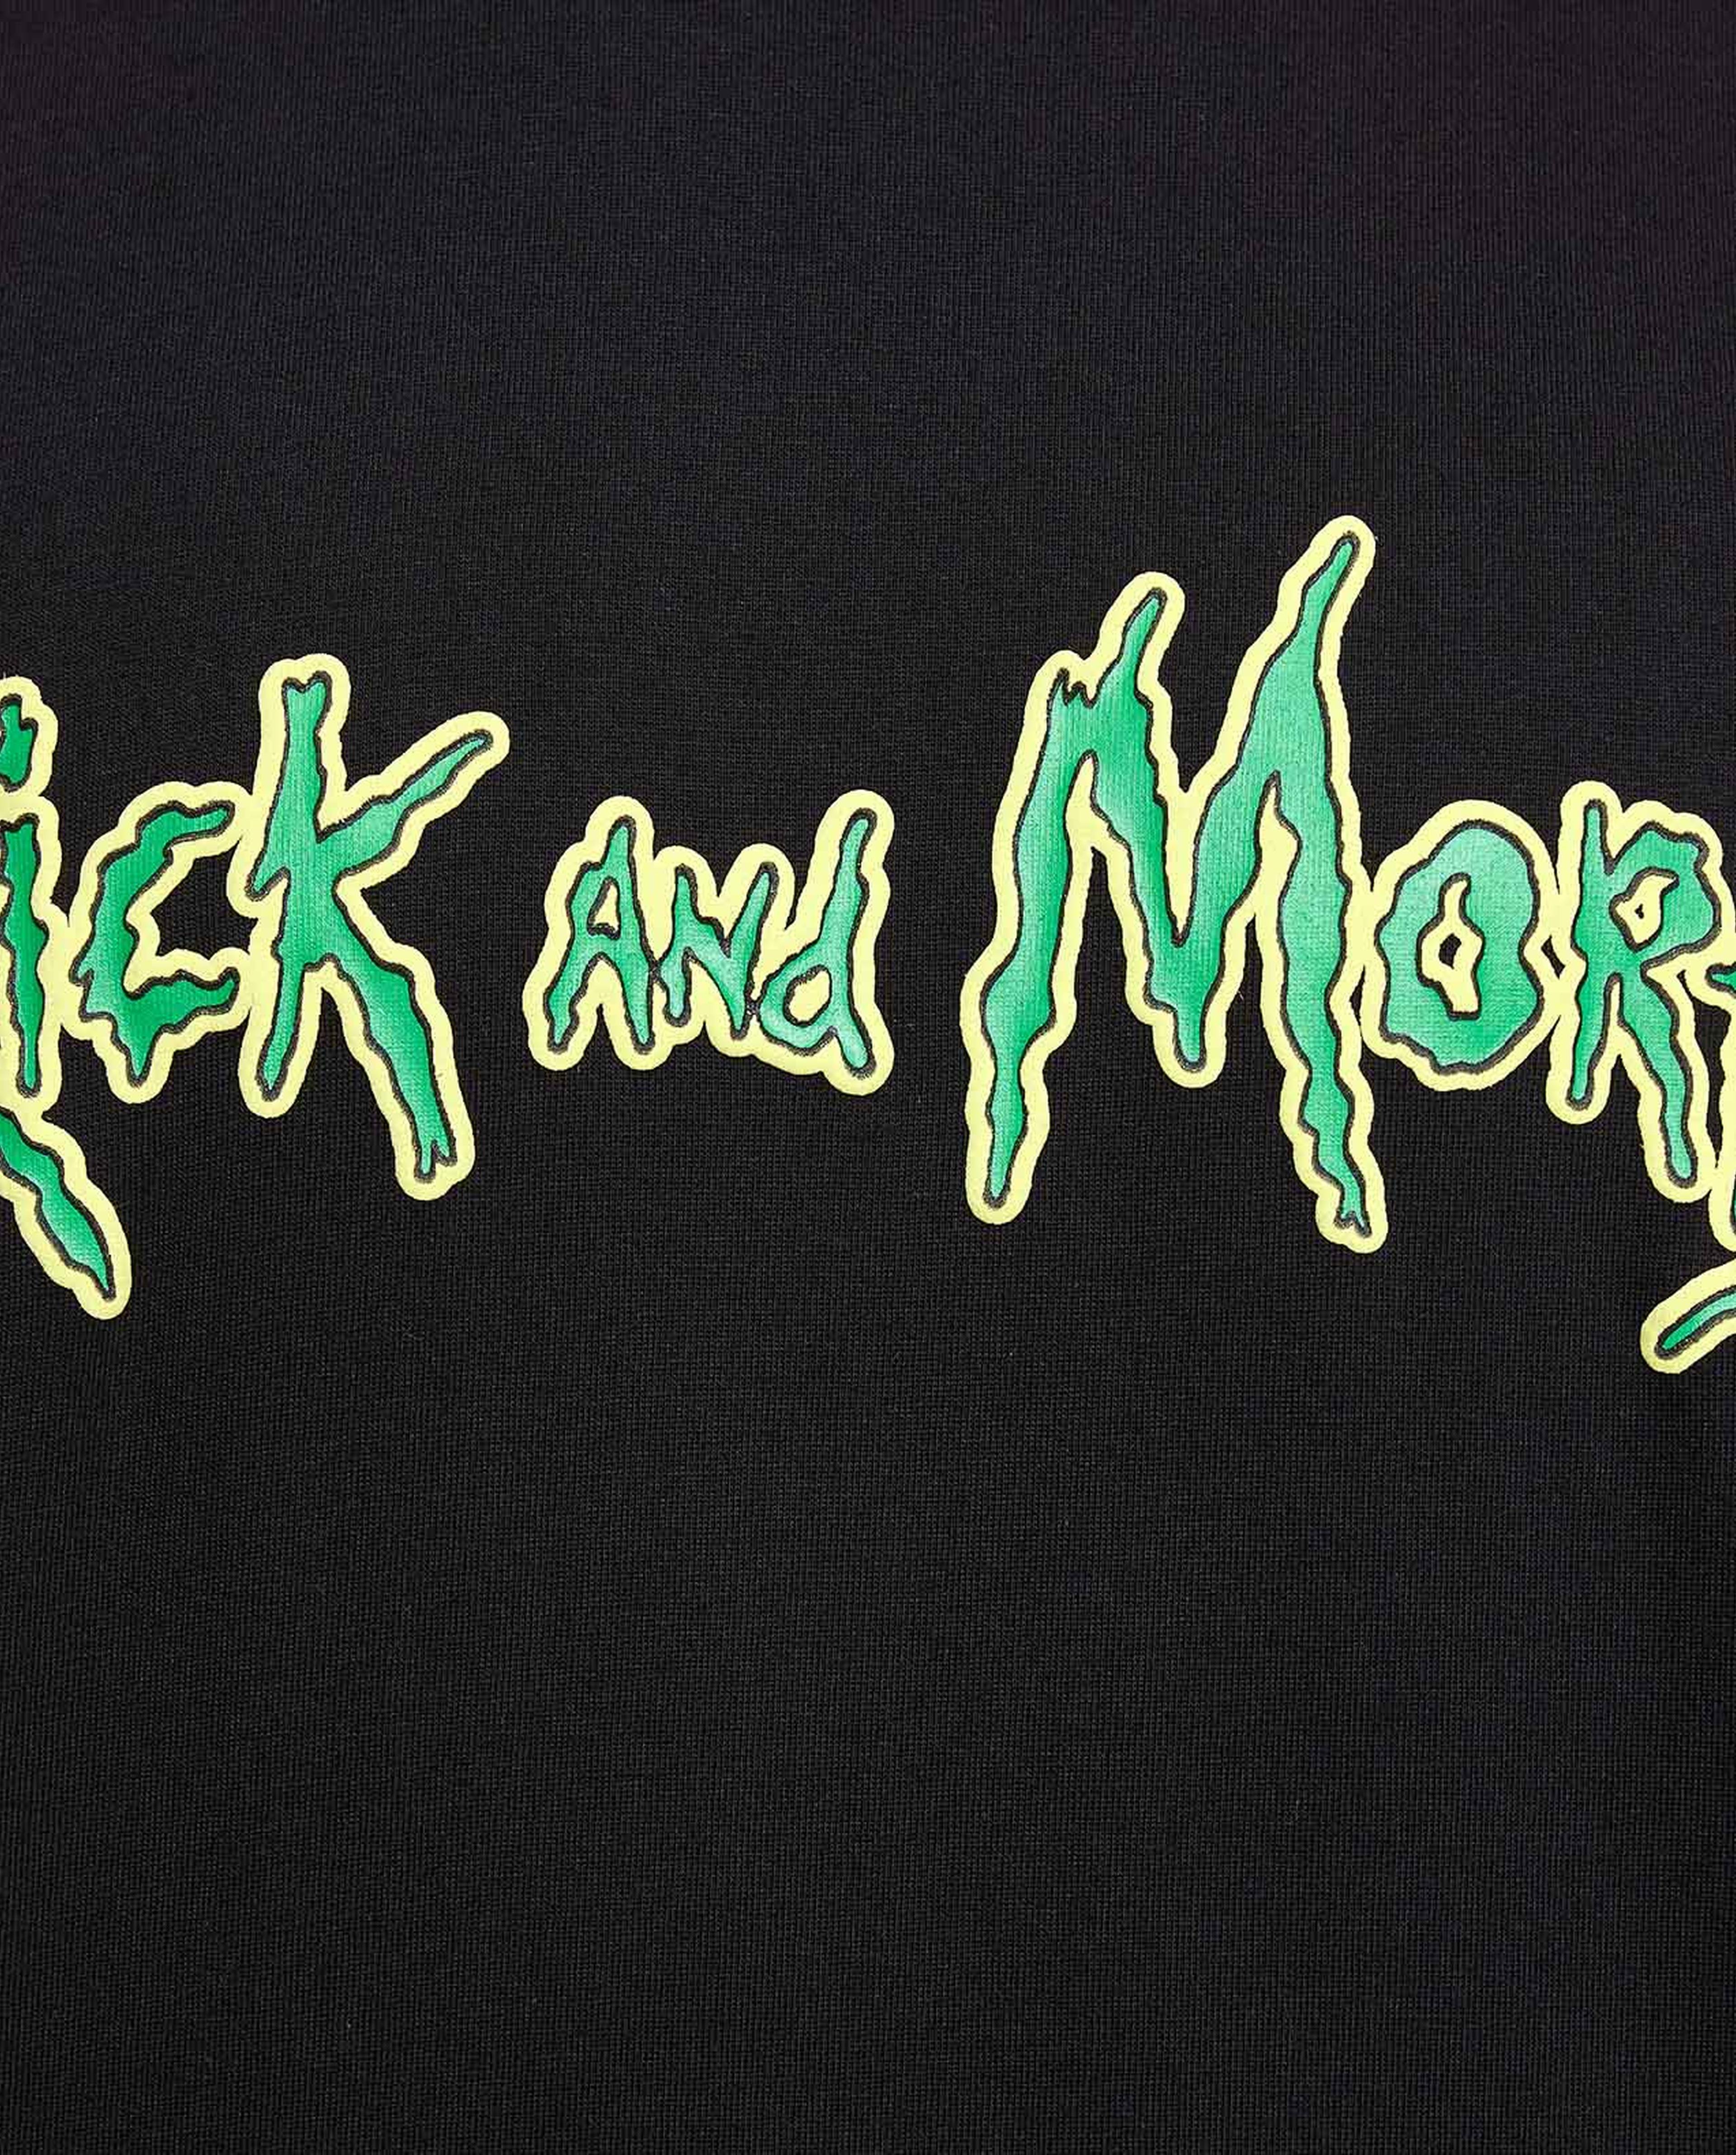 Rick and Morty Printed T-Shirt with Crew Neck and Short Sleeves